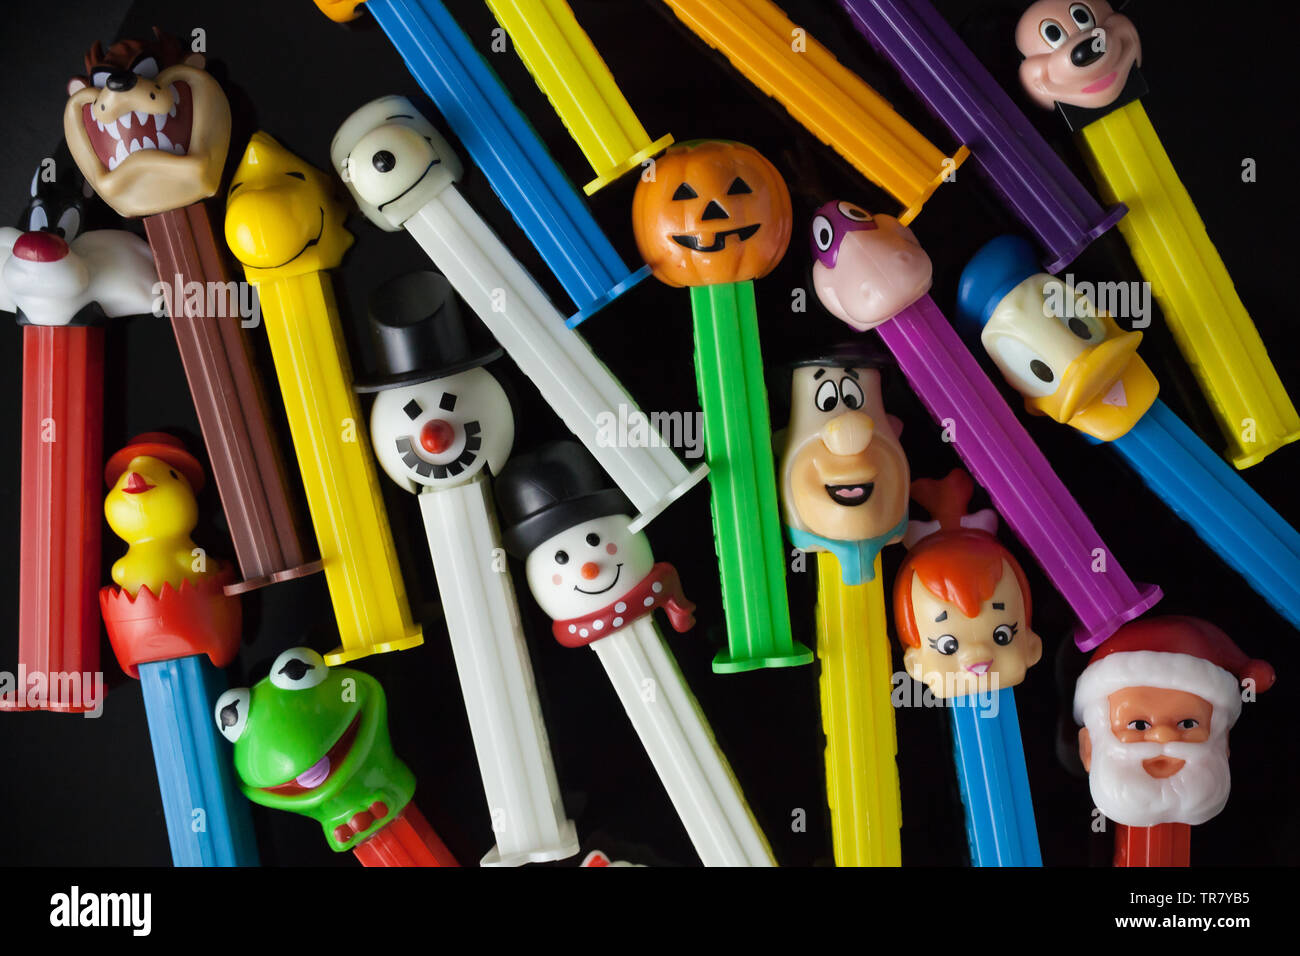 WOODBRIDGE, NEW JERSEY / UNITED STATES: May 12, 2019: Colorful Pez dispensers from the 1980s and 1990s are seen against a black background Stock Photo